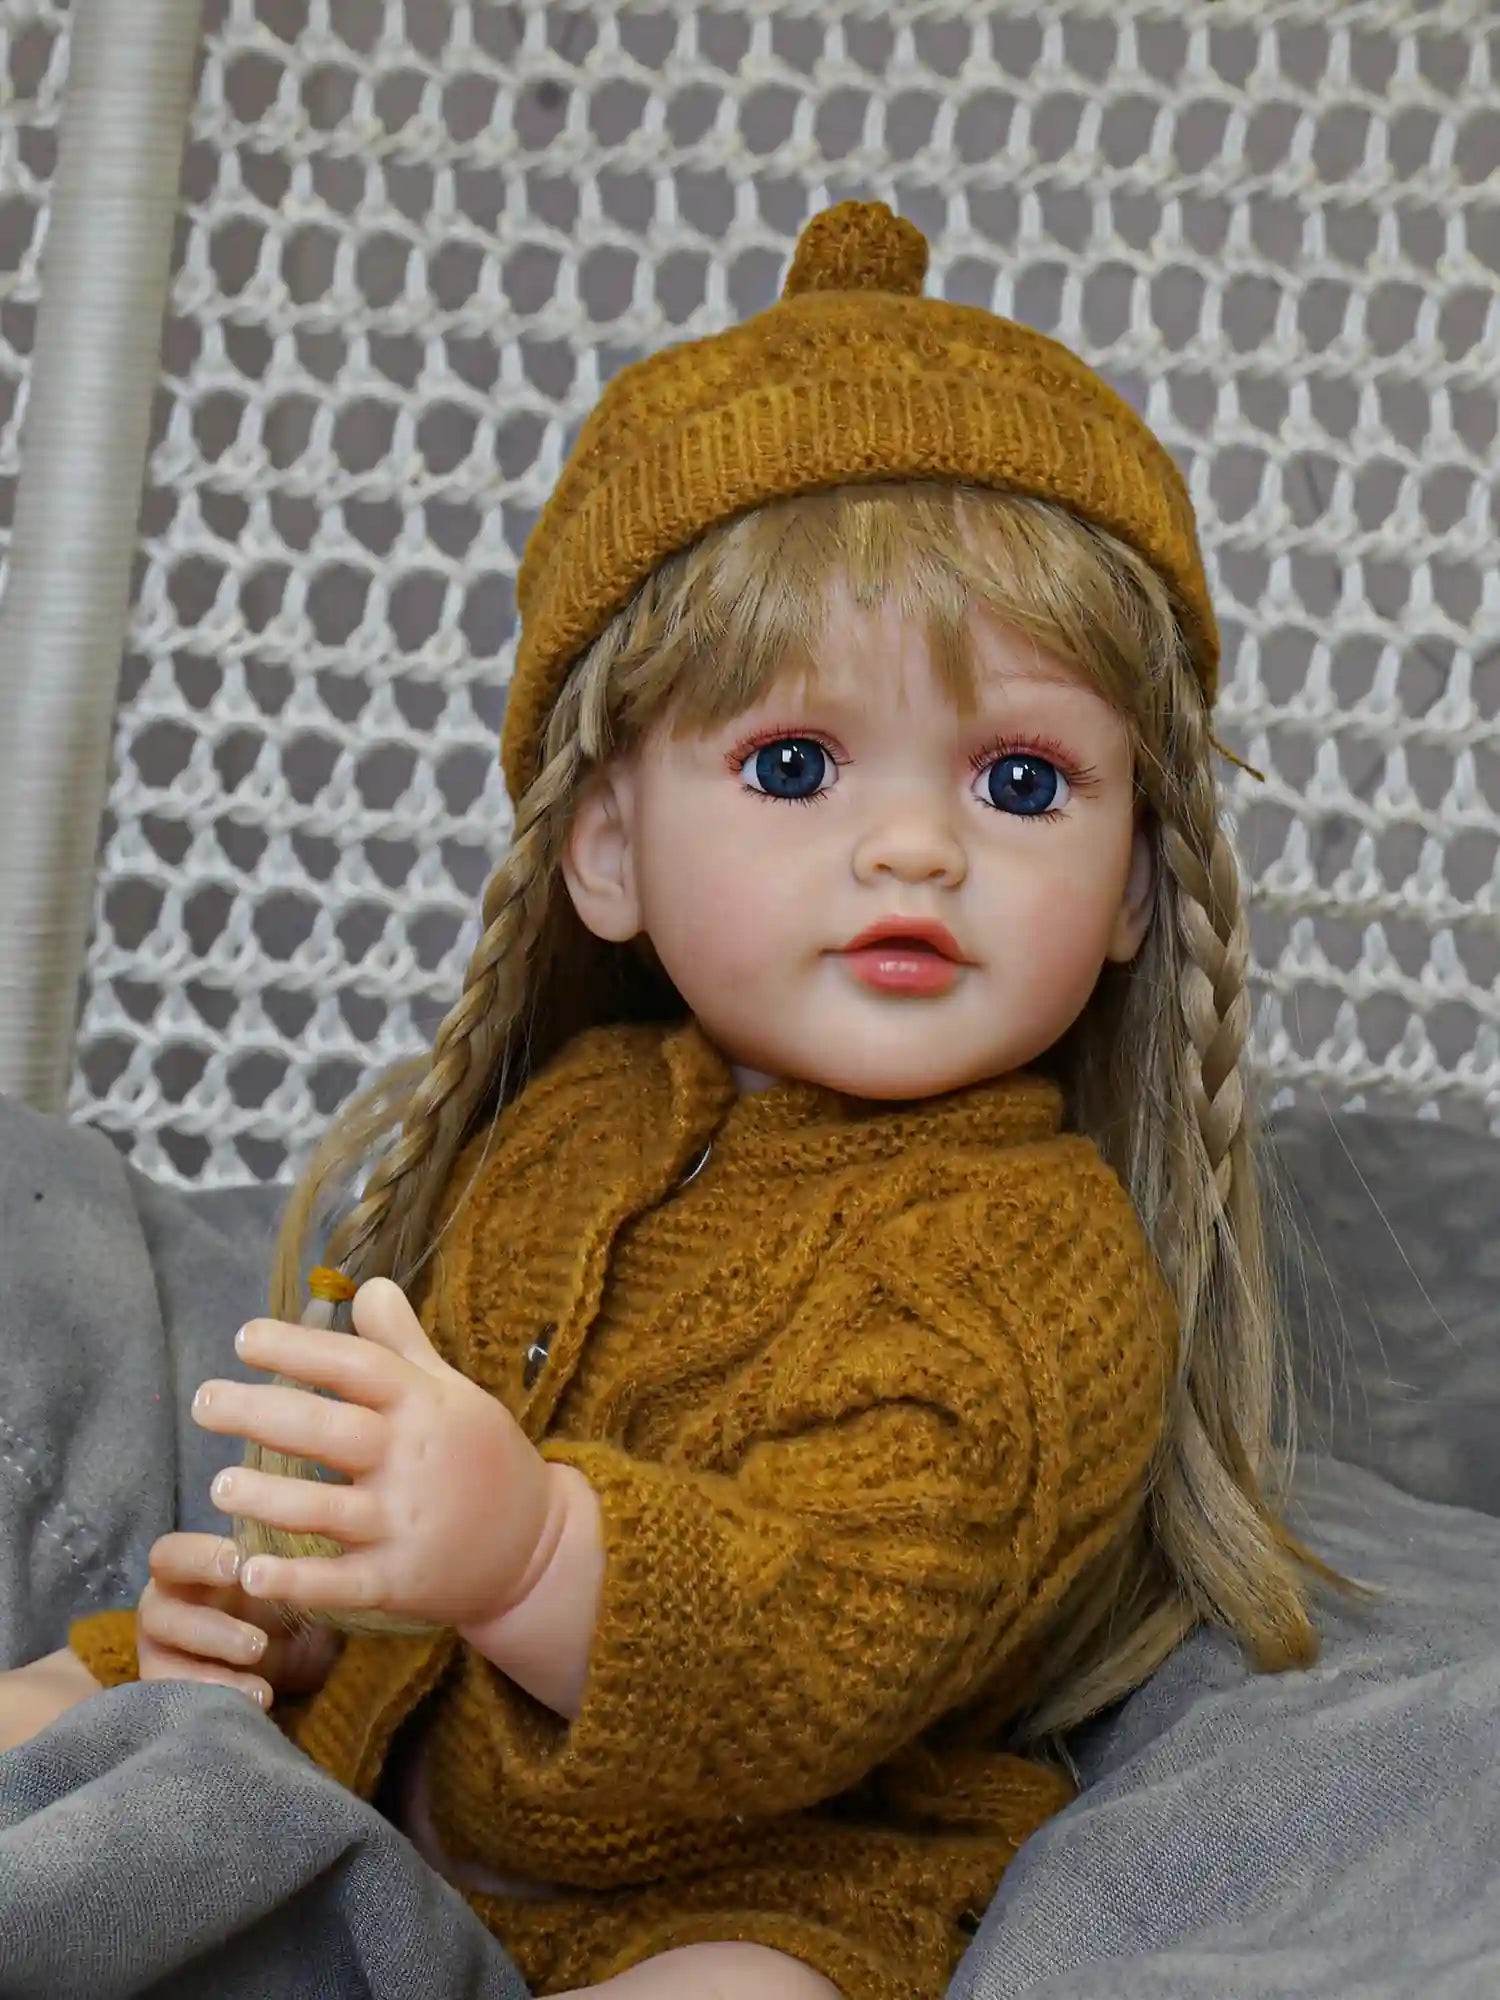 The serene expression of our reborn doll, complemented by her flowing golden locks and dressed in tranquil green, brings a peaceful presence to your home.